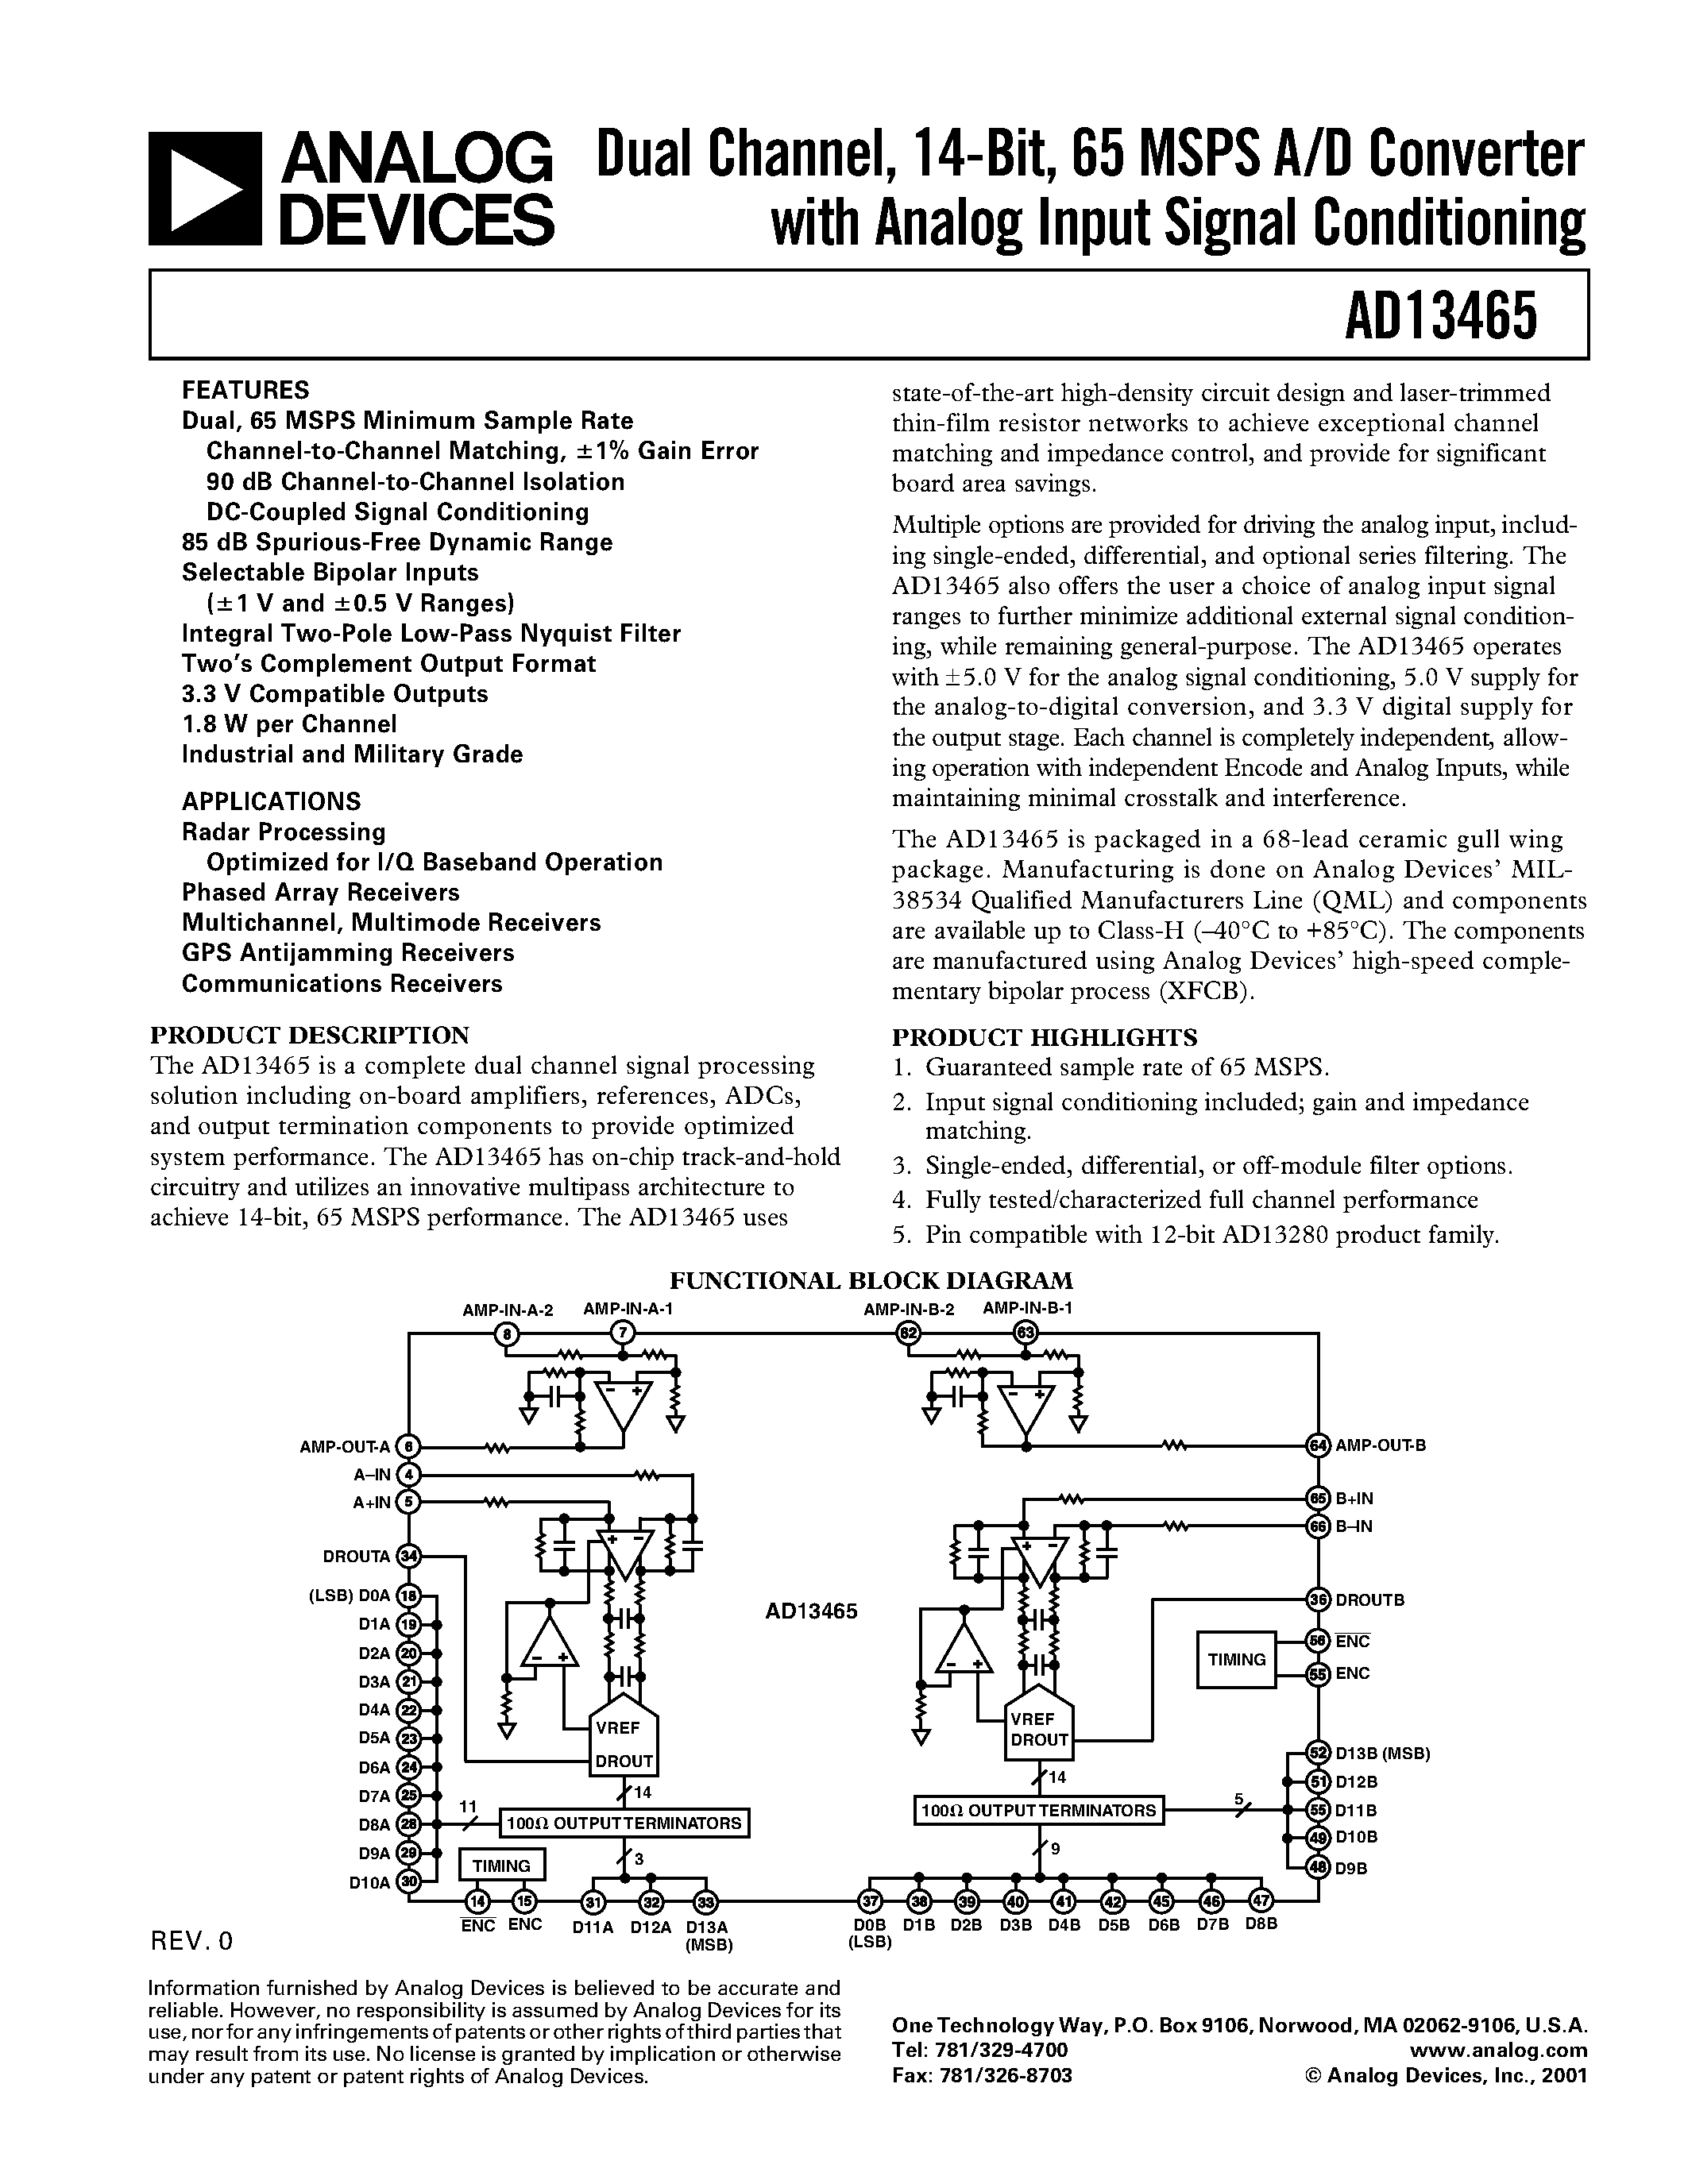 Datasheet AD13465/PCB - Dual Channel/ 14-Bit/ 65 MSPS A/D Converter with Analog Input Signal Conditioning page 1